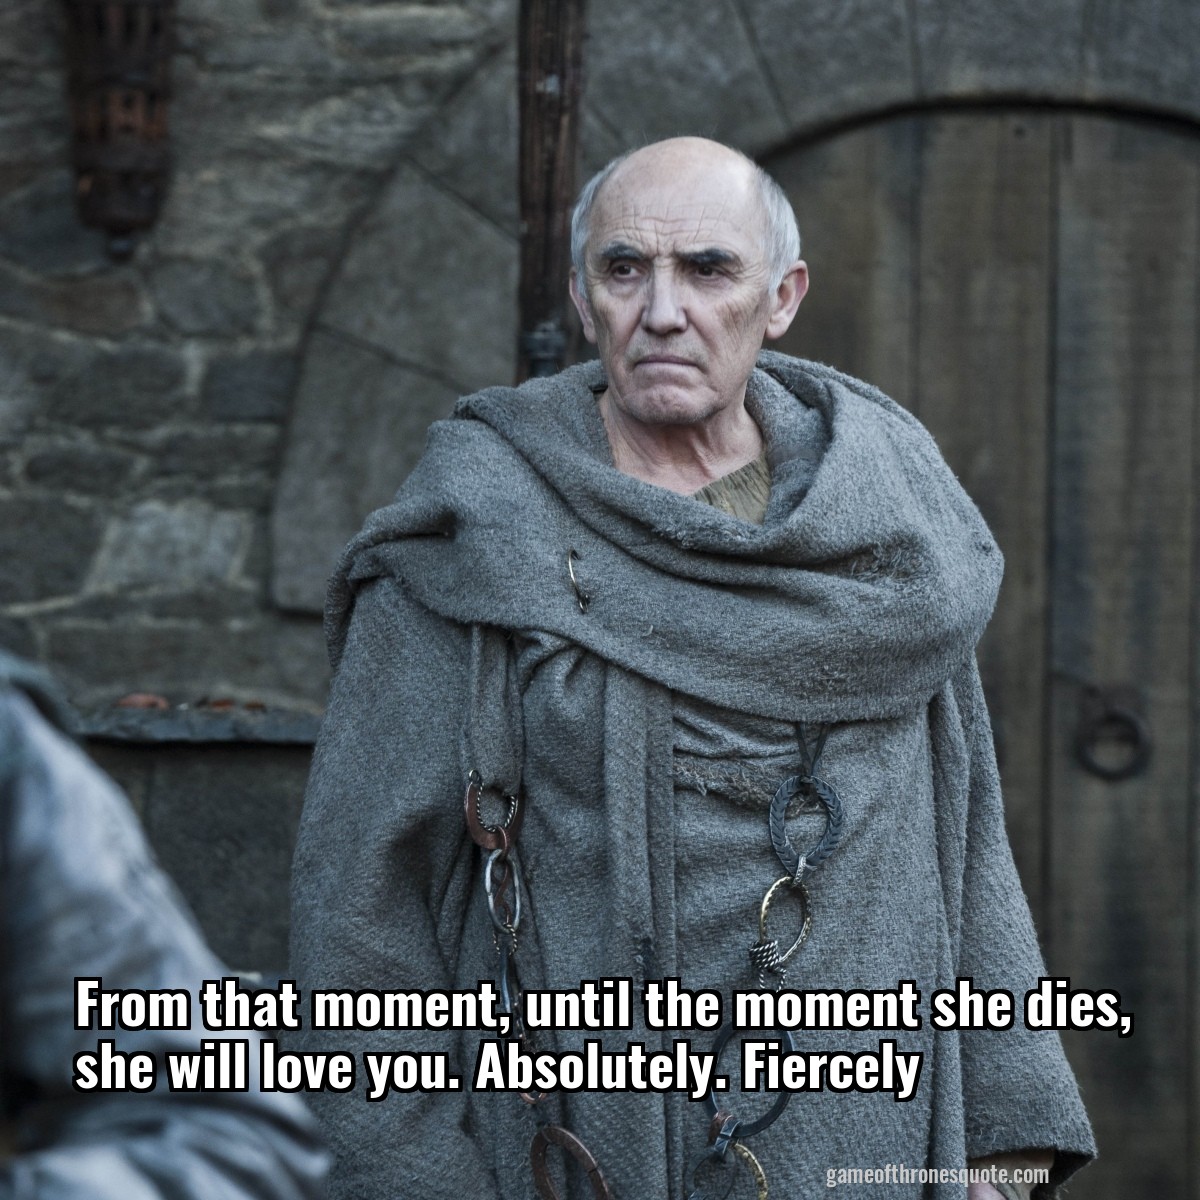 From that moment, until the moment she dies, she will love you. Absolutely. Fiercely